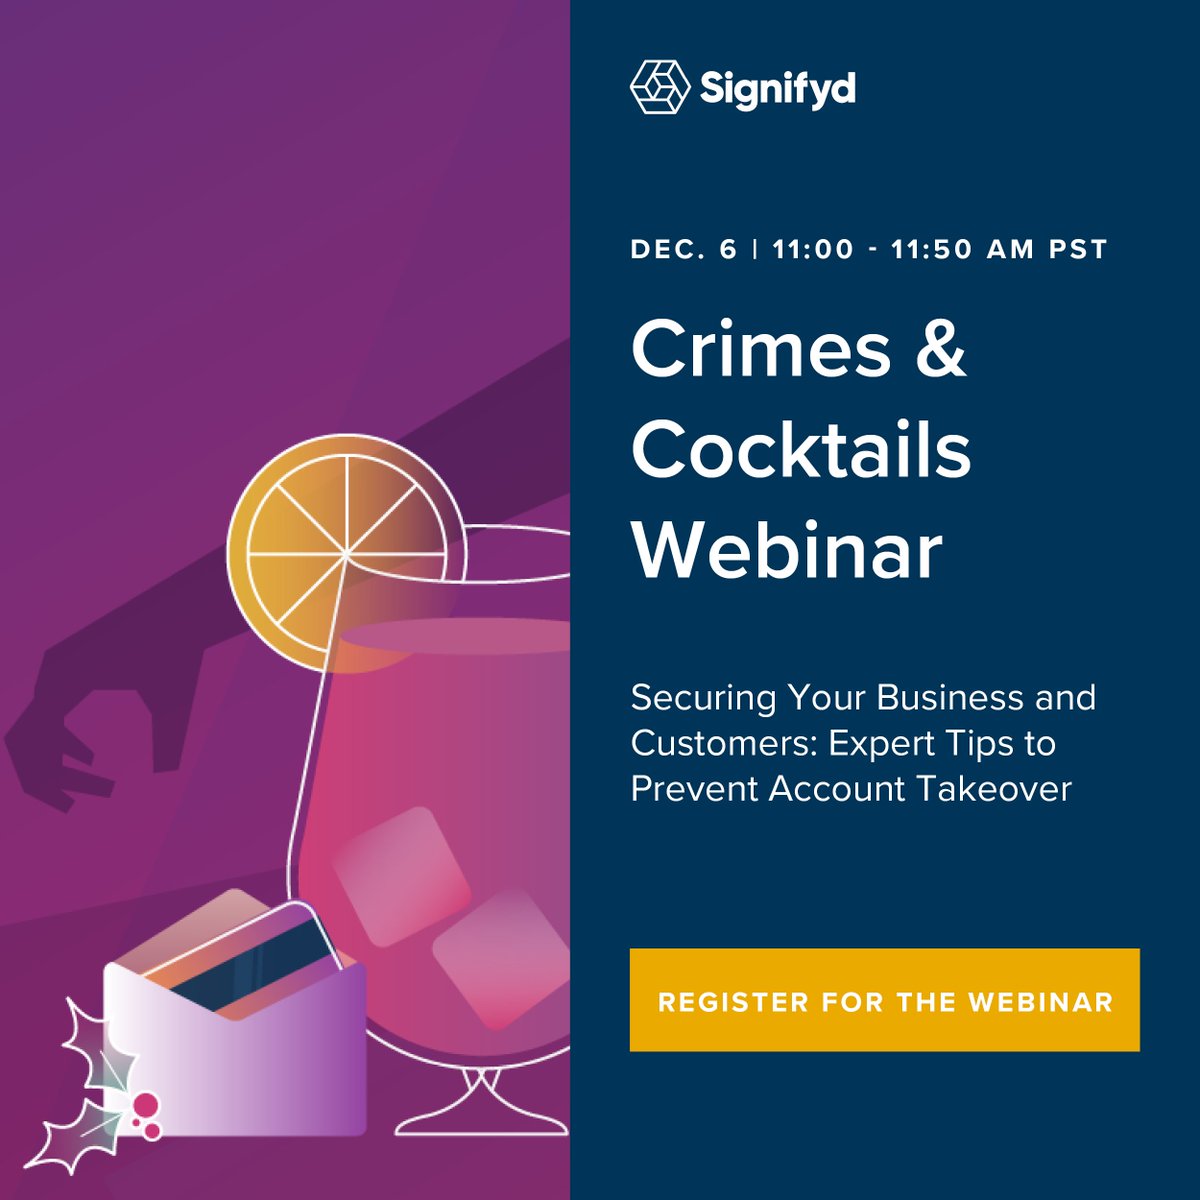 Crimes & Cocktails: Signifyd’s J. Bennett and Eleanor Ritchie discuss 📈 account takeover#BFCM performance🛡️account protection challenges🤖Real-life risk intelligence stories Dec.6 at 11 PST - save your spot! bit.ly/47wJHRq #Ecommerce #Retail #AI #FraudDetection